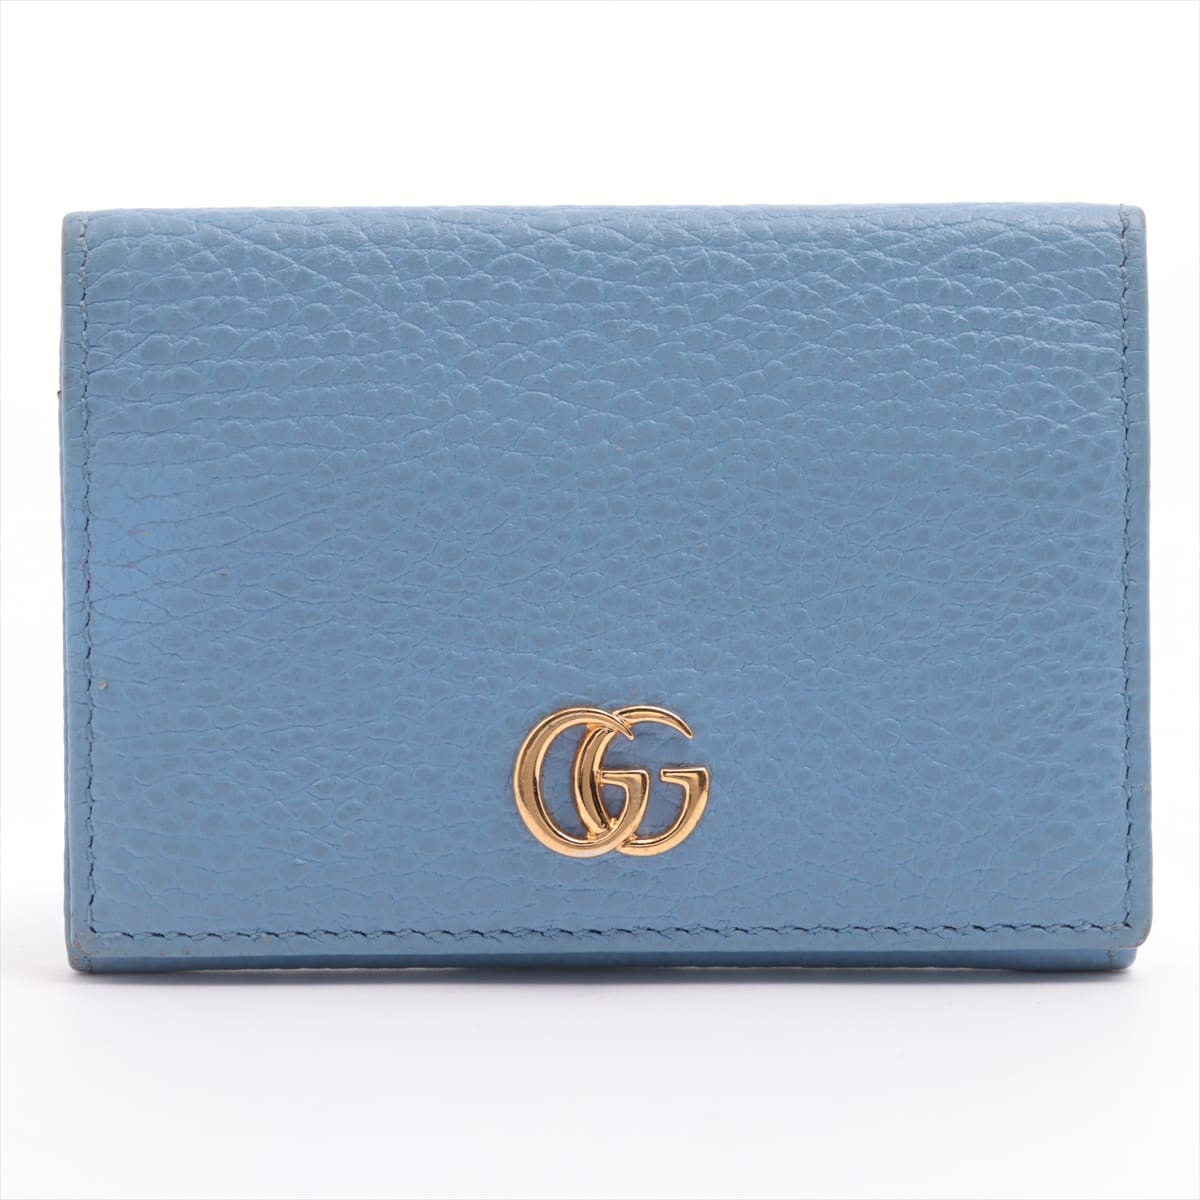 Gucci GG Marmont Leather Card Case Blue Exterior scratches There is a pen mark on the inside